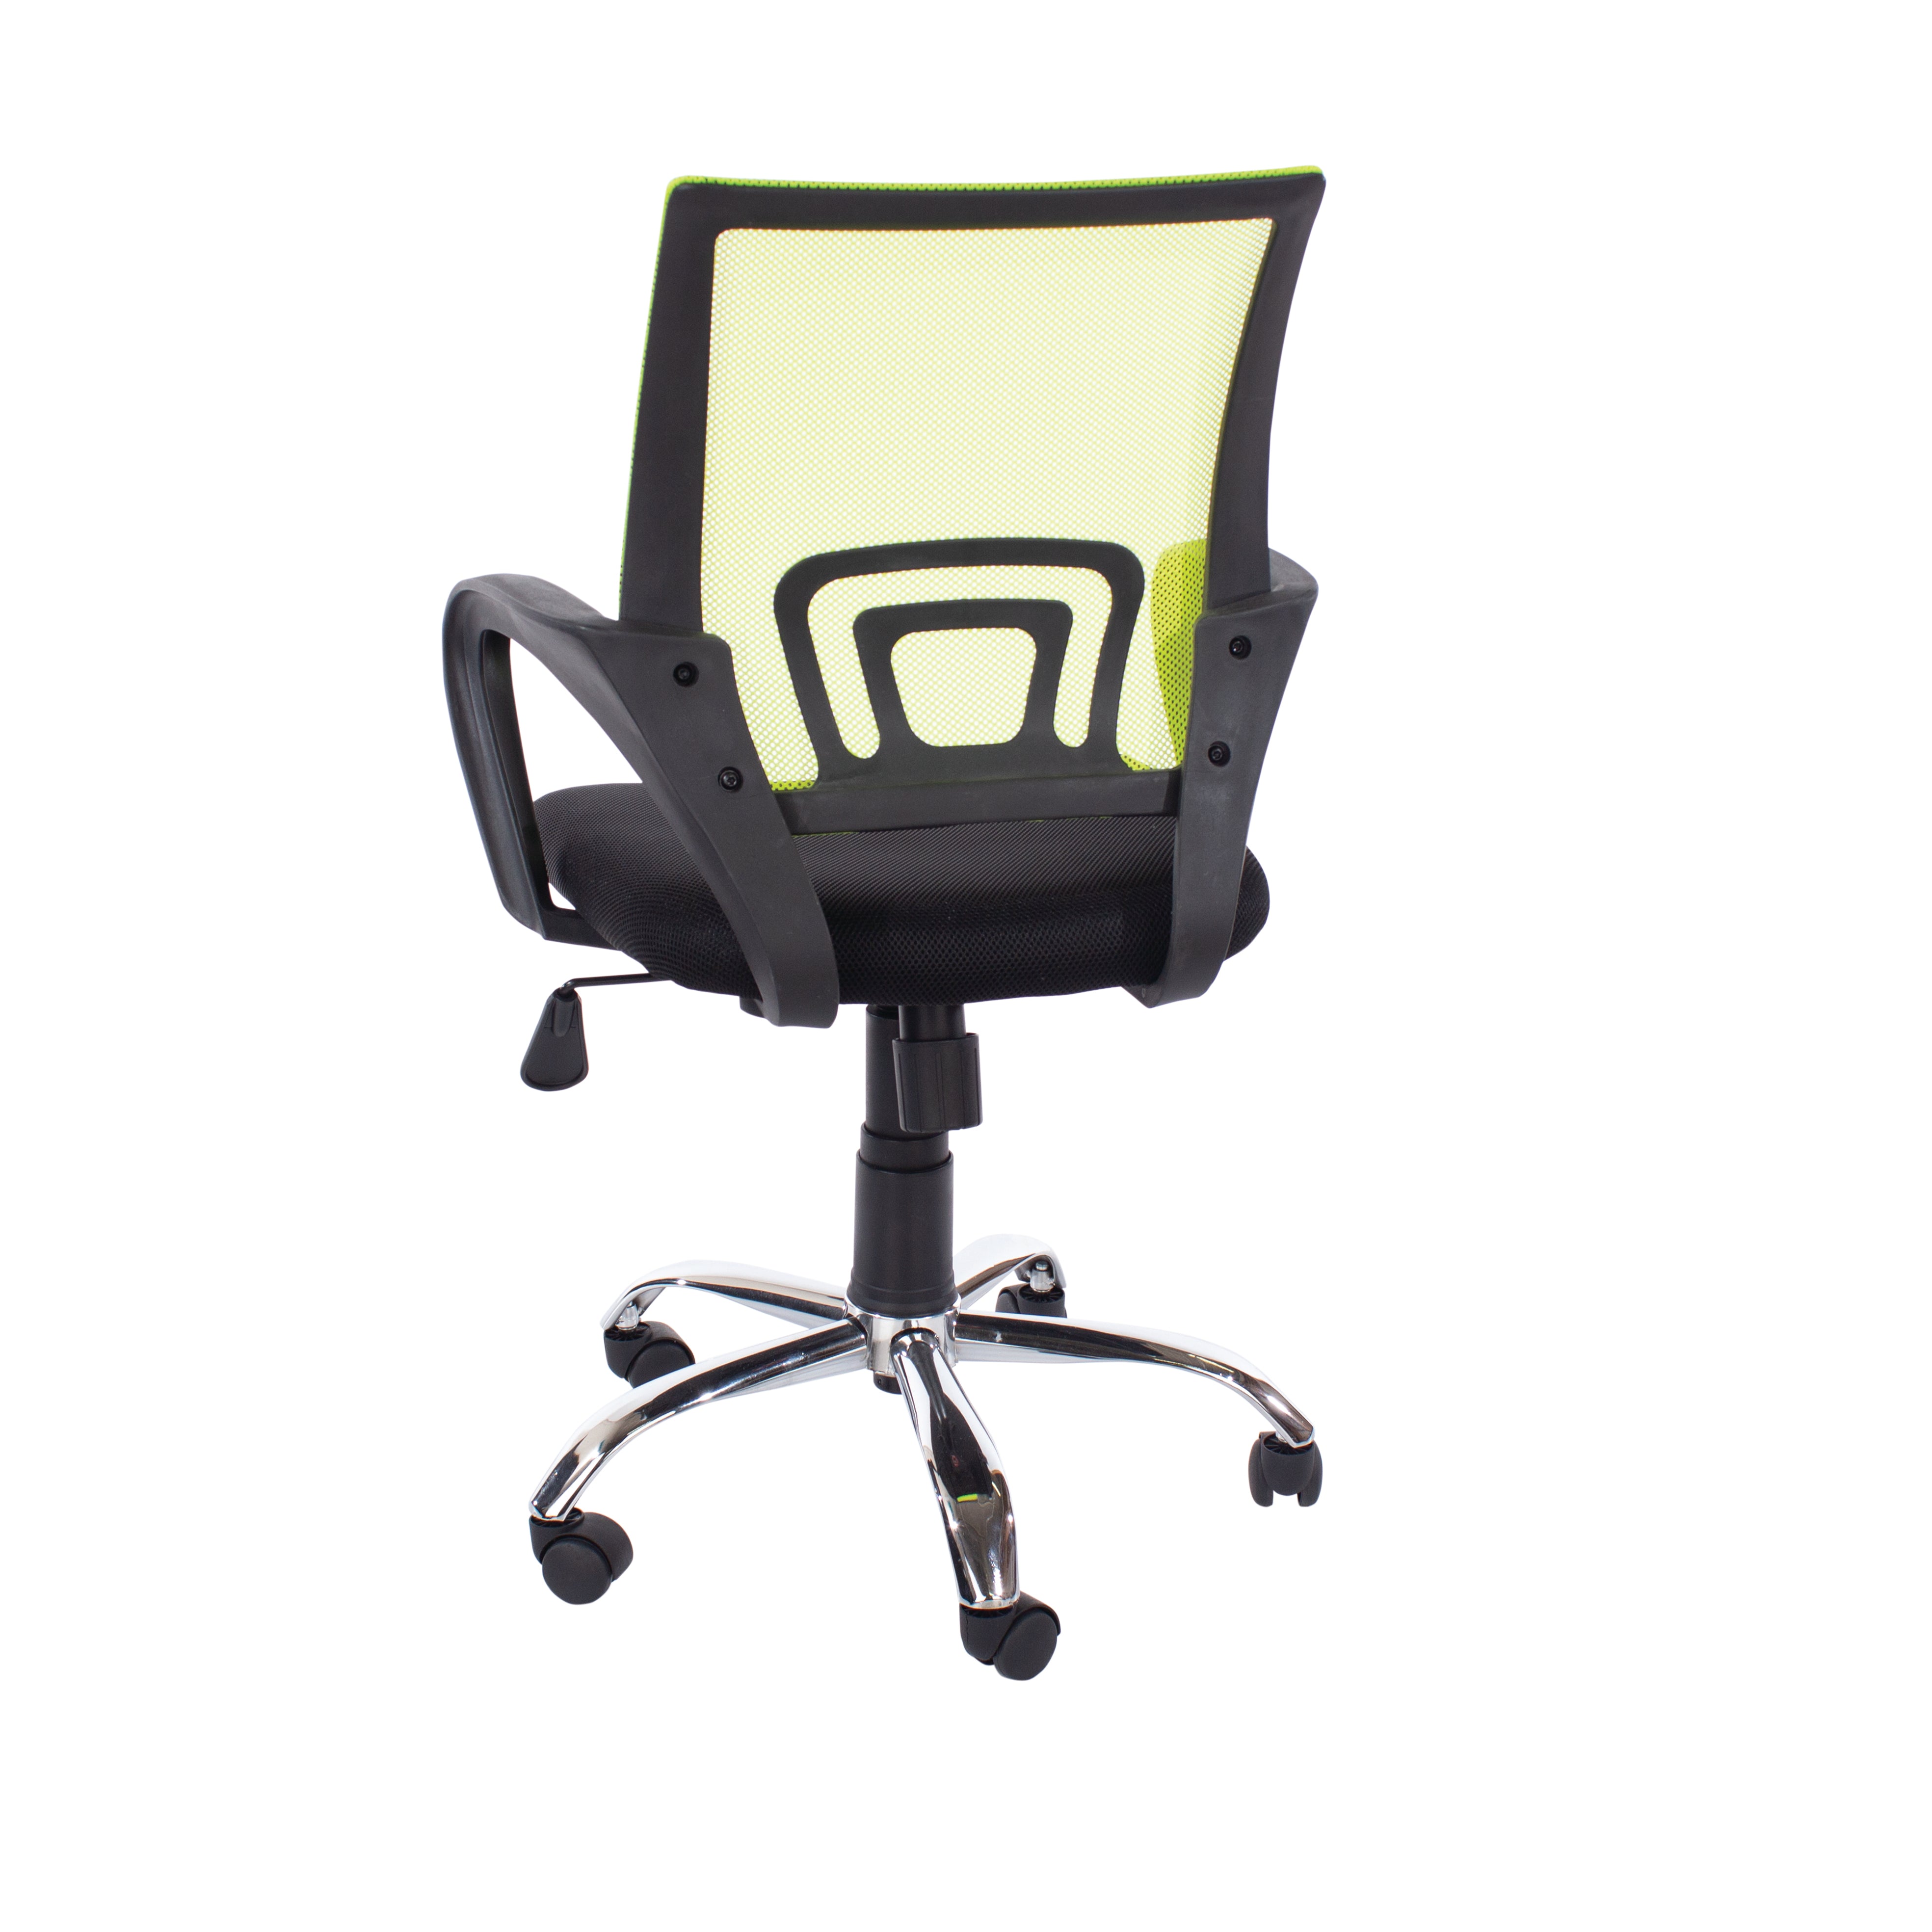 Study Chair In Lime Green Mesh Back, Black Fabric Seat & Chrome Base